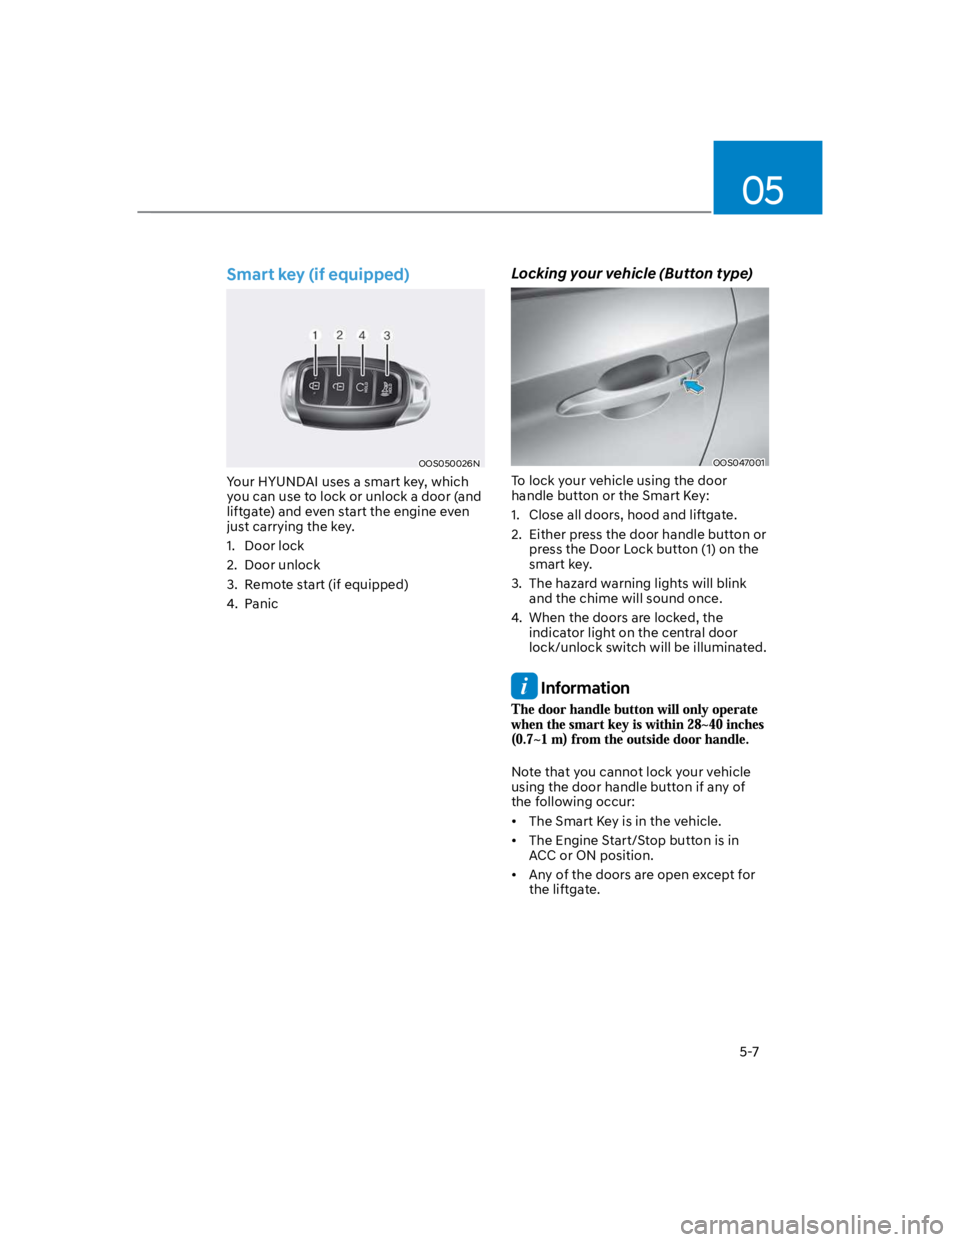 HYUNDAI KONA 2022  Owners Manual 05
5-7
Smart key (if equipped)
OOS050026N
Your HYUNDAI uses a smart key, which 
you can use to lock or unlock a door (and 
liftgate) and even start the engine even 
just carrying the key.
1.  Door loc